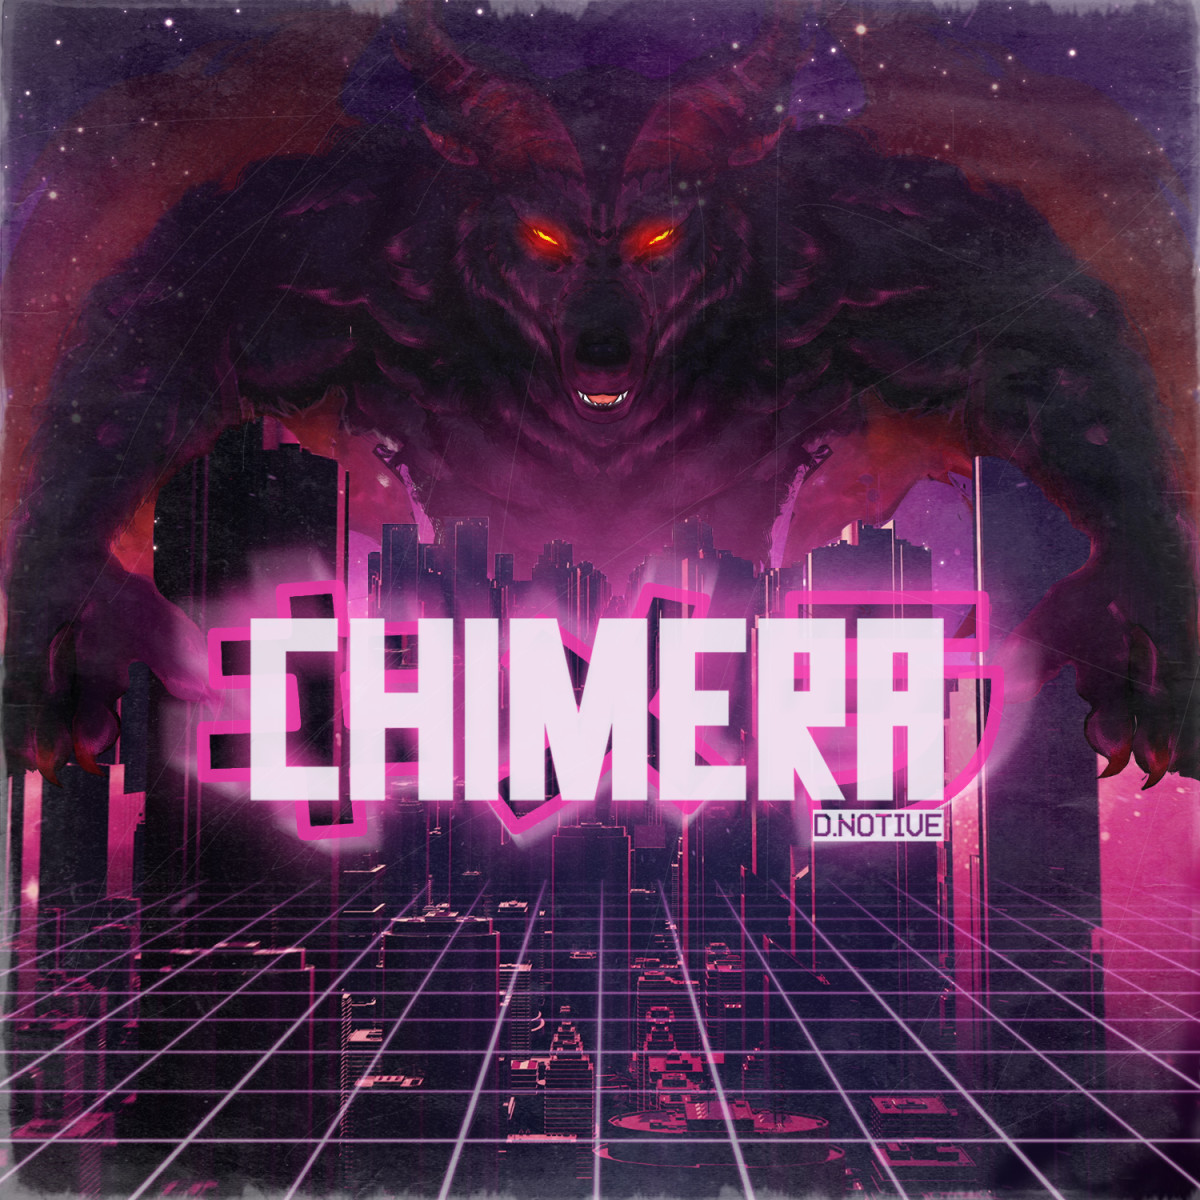 synth-ep-review-chimera-by-dnotive-and-guests